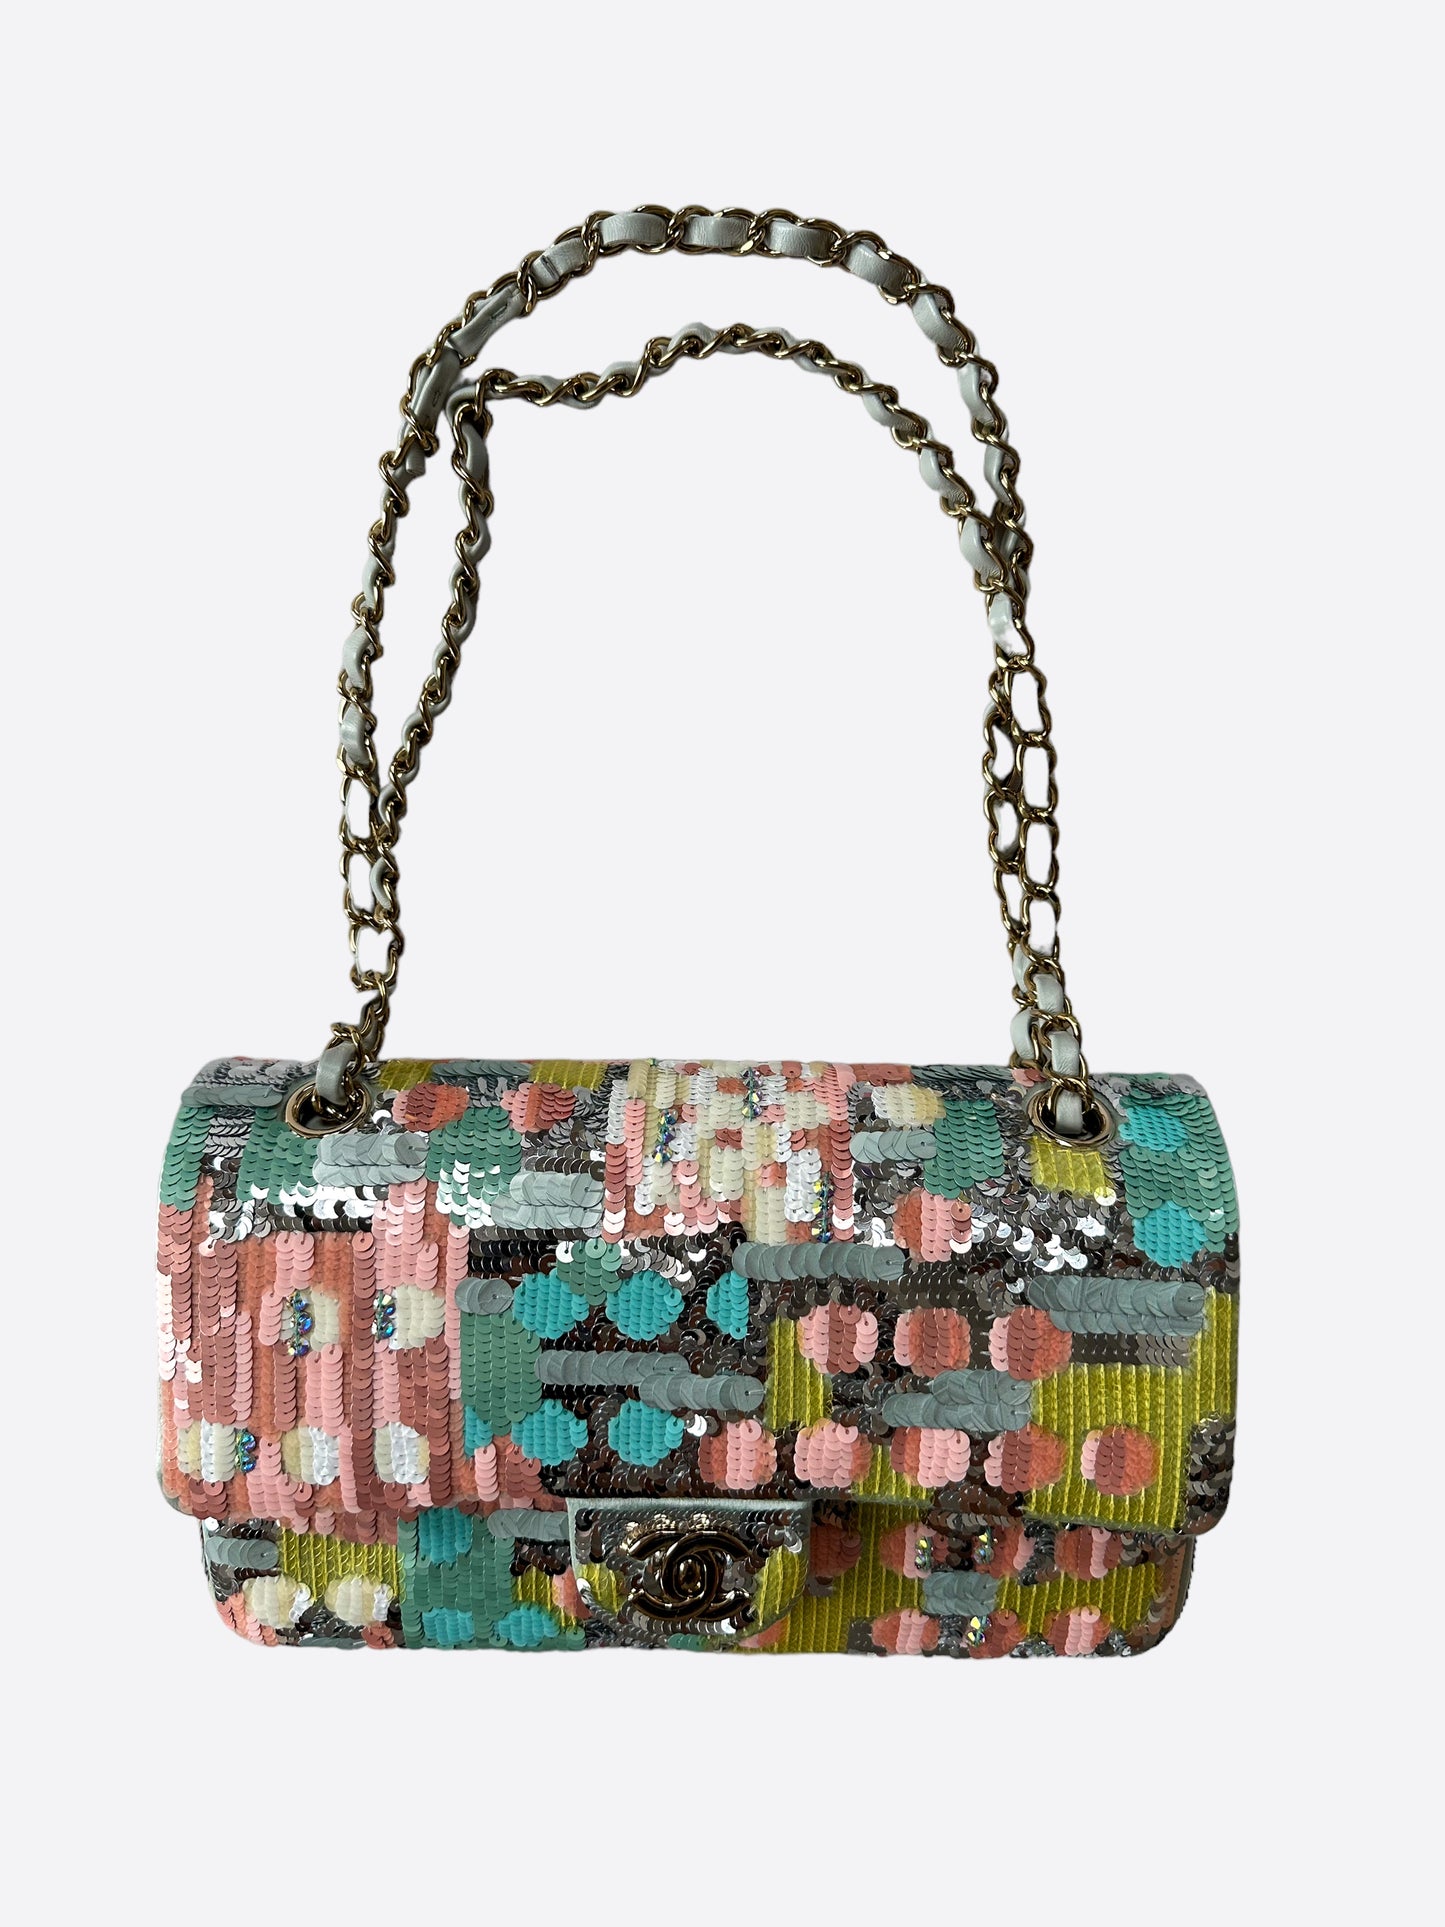 Multicolor Sequin and Lambskin Small Single Flap Bag Black Hardware, 2019